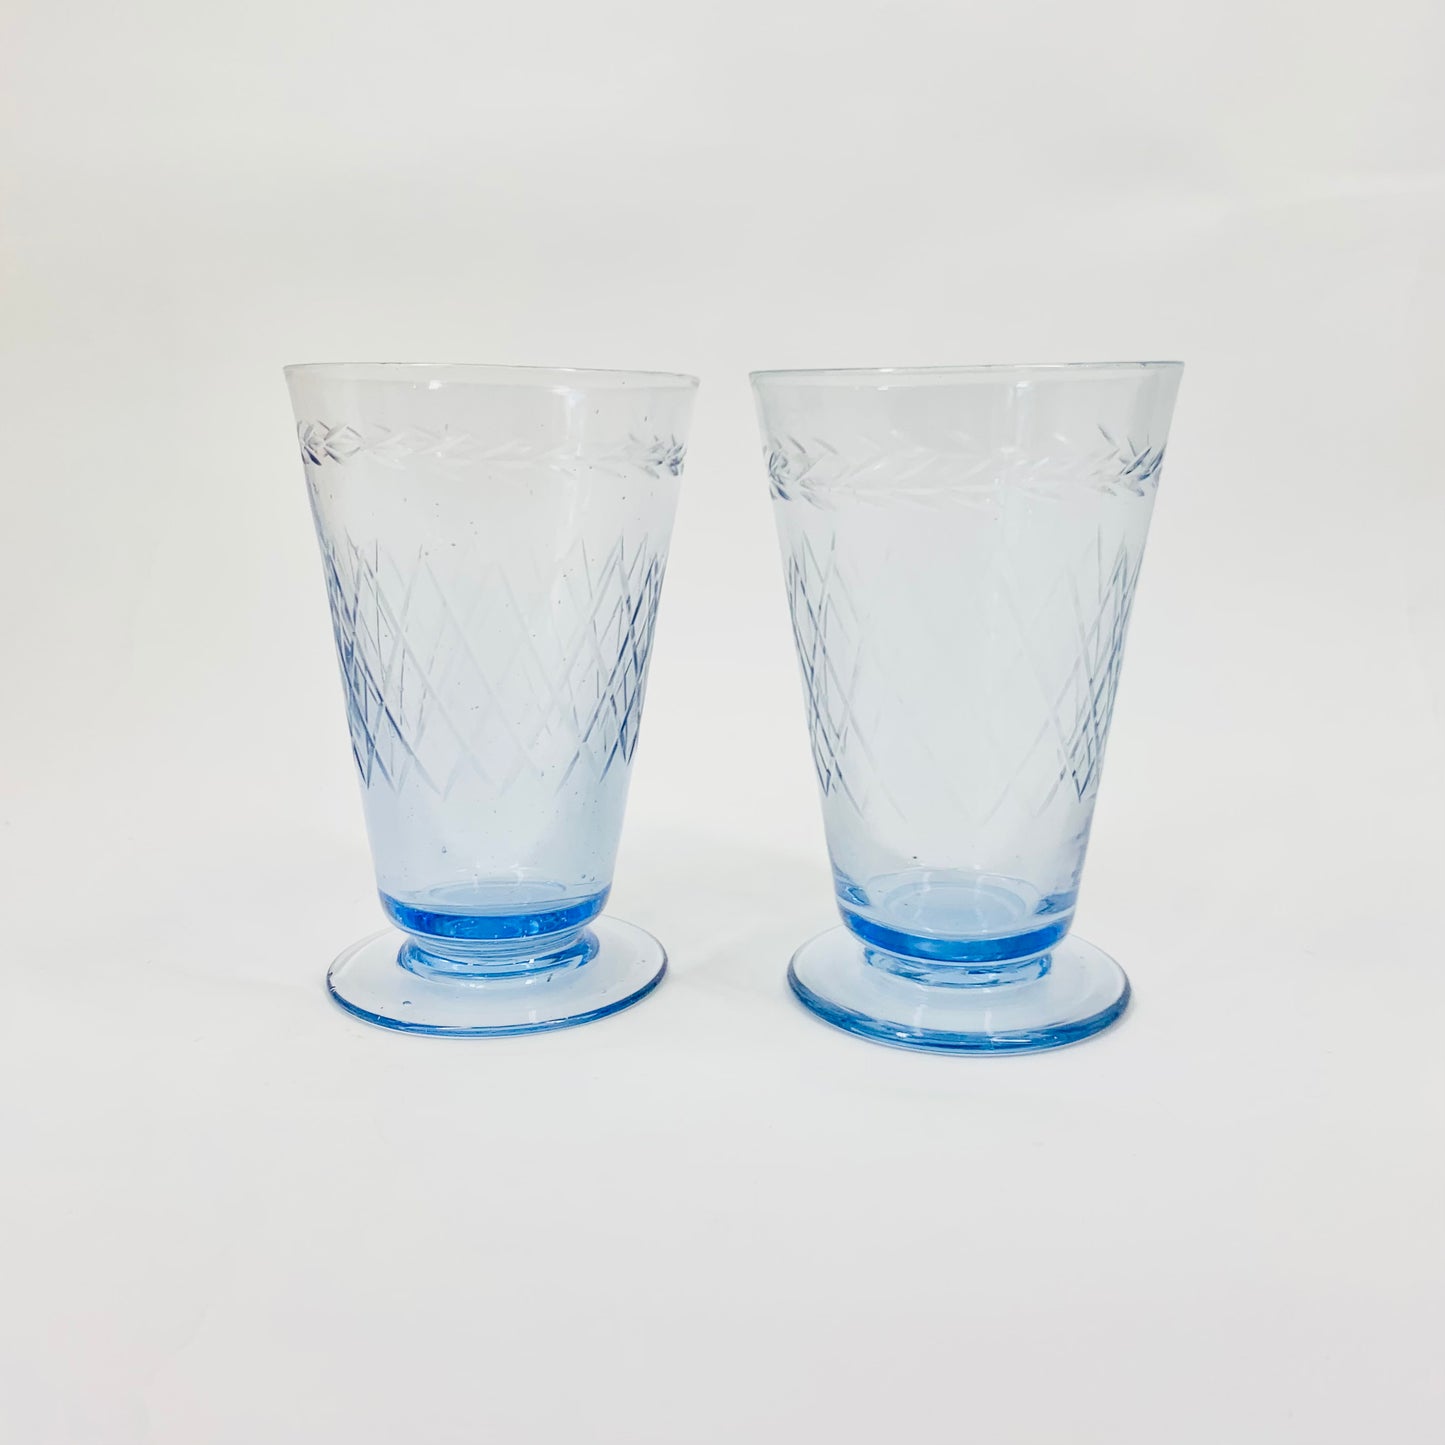 Extremely rare antique Art Deco hand etched depression blue footed glasses